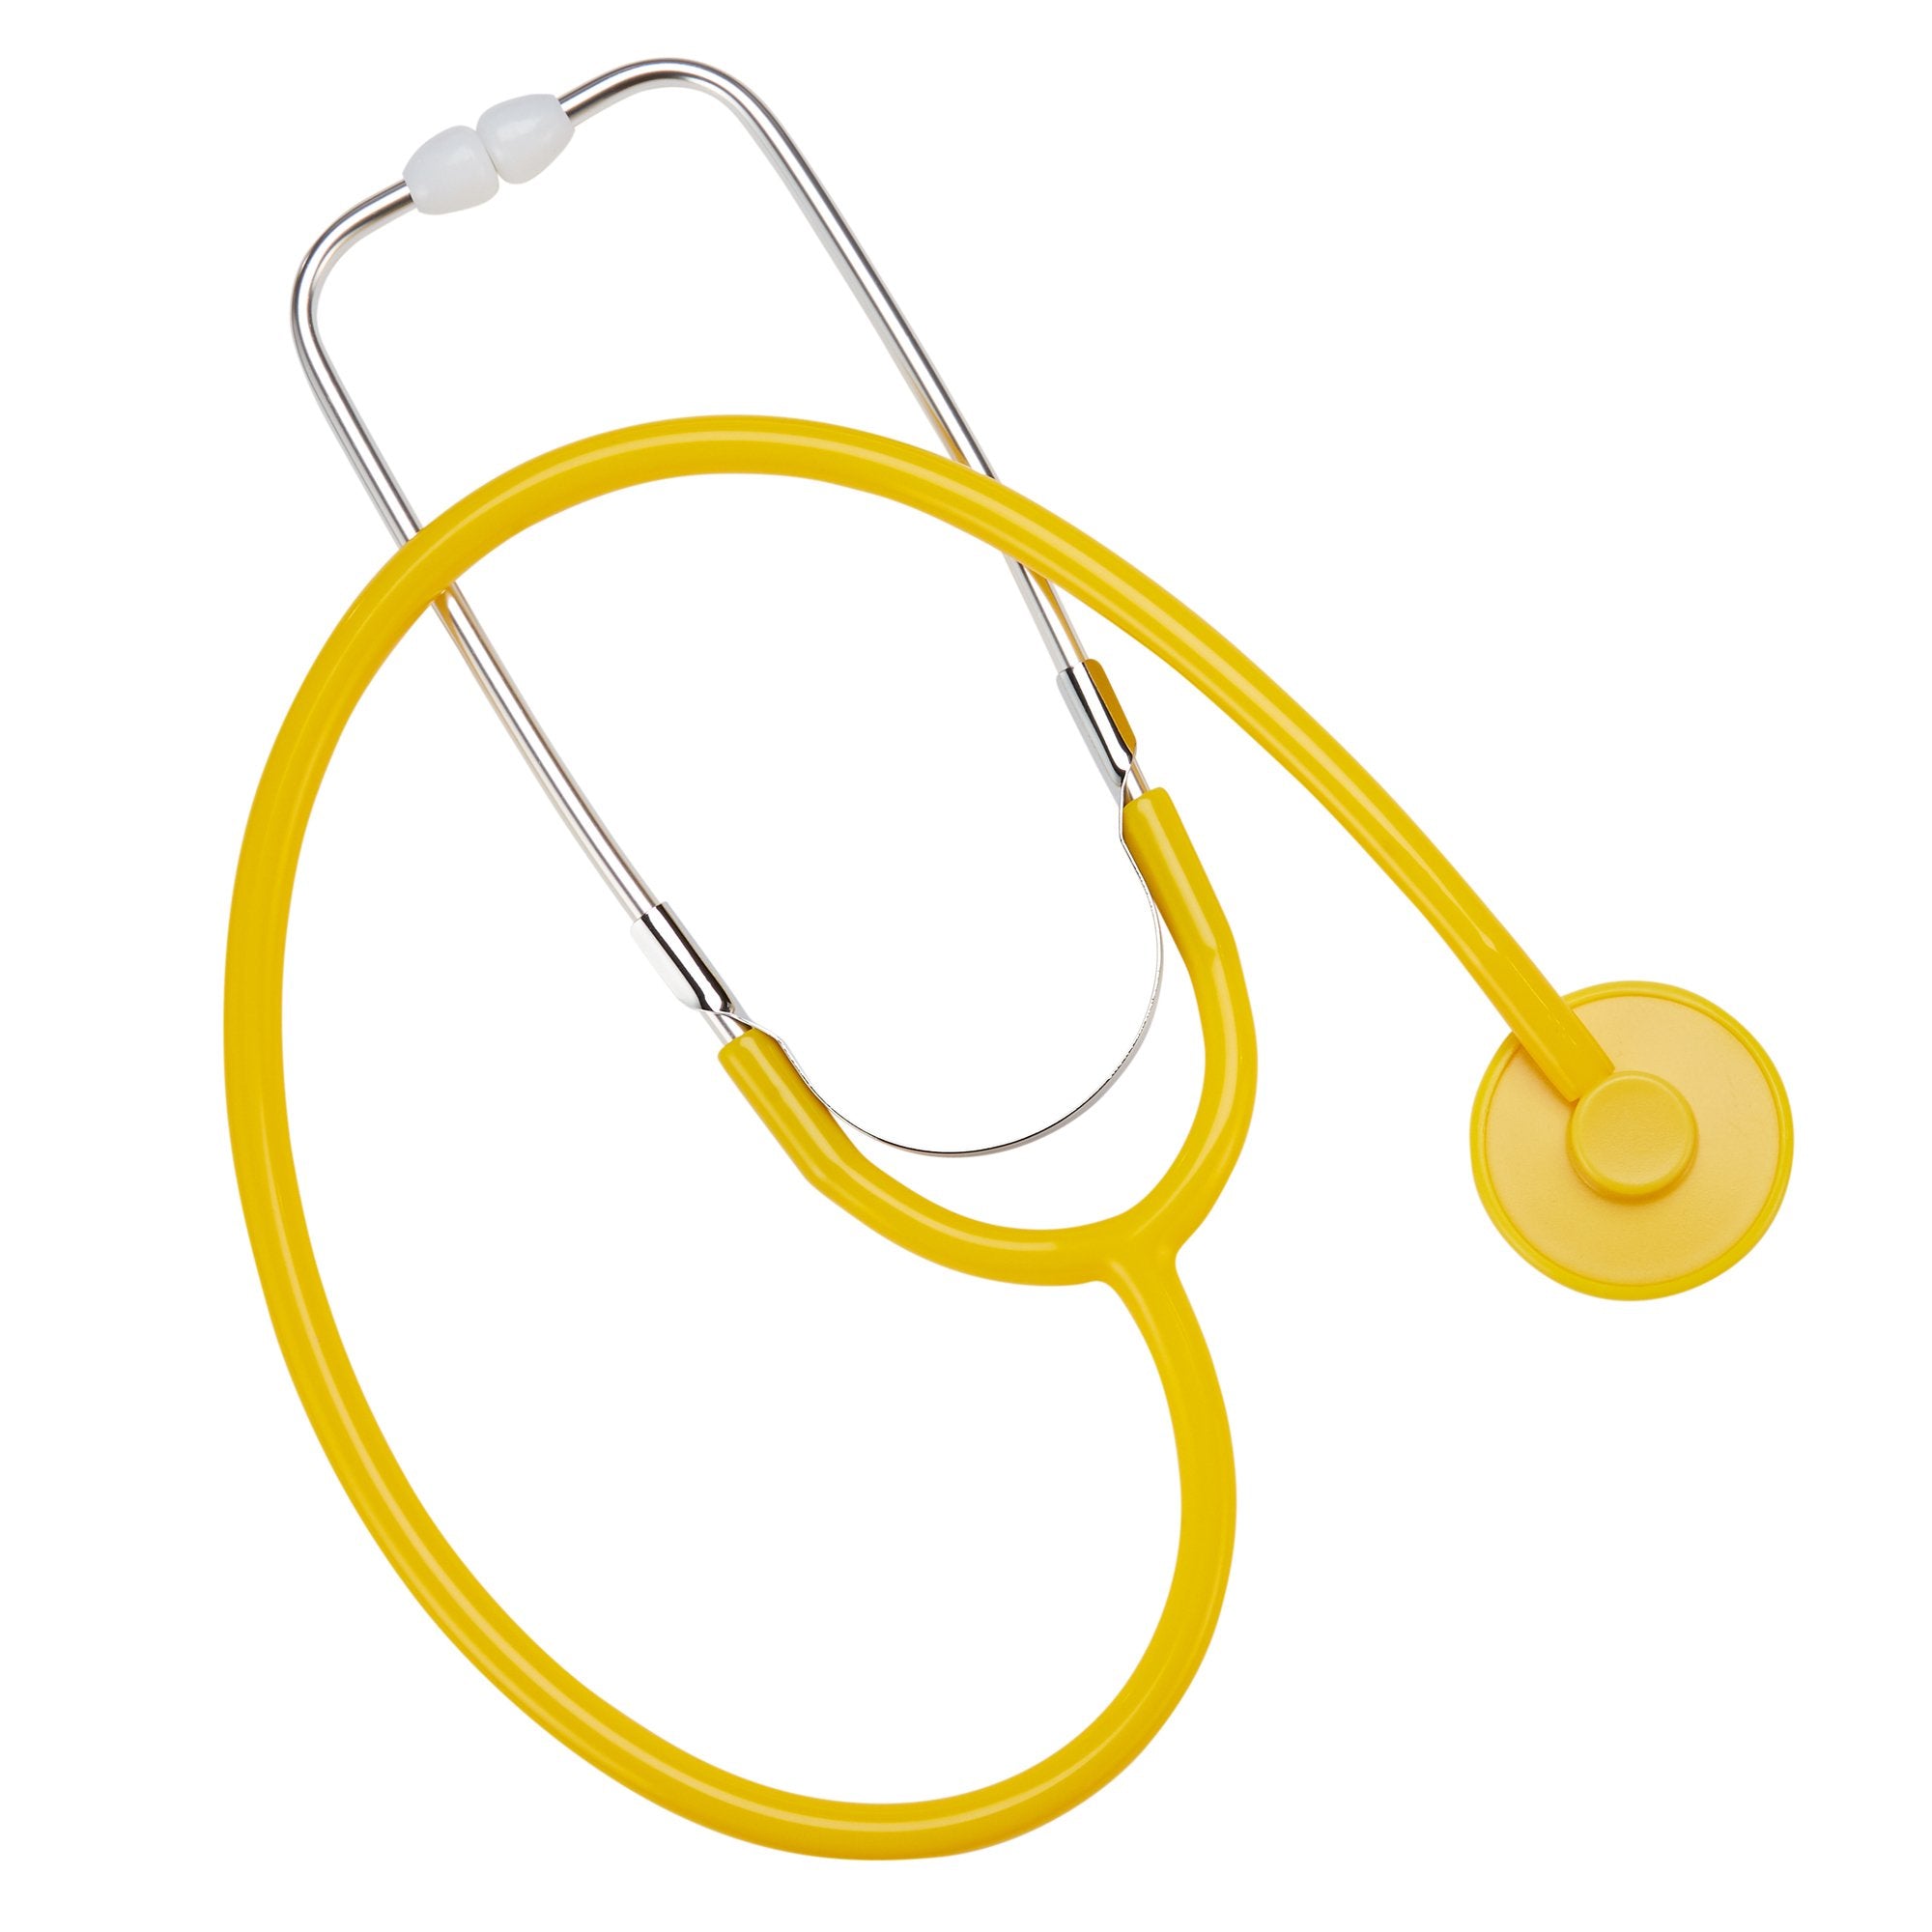 Disposable Stethoscope Proscope664 Yellow 1-Tube 22 Inch Tube Single Head Chestpiece